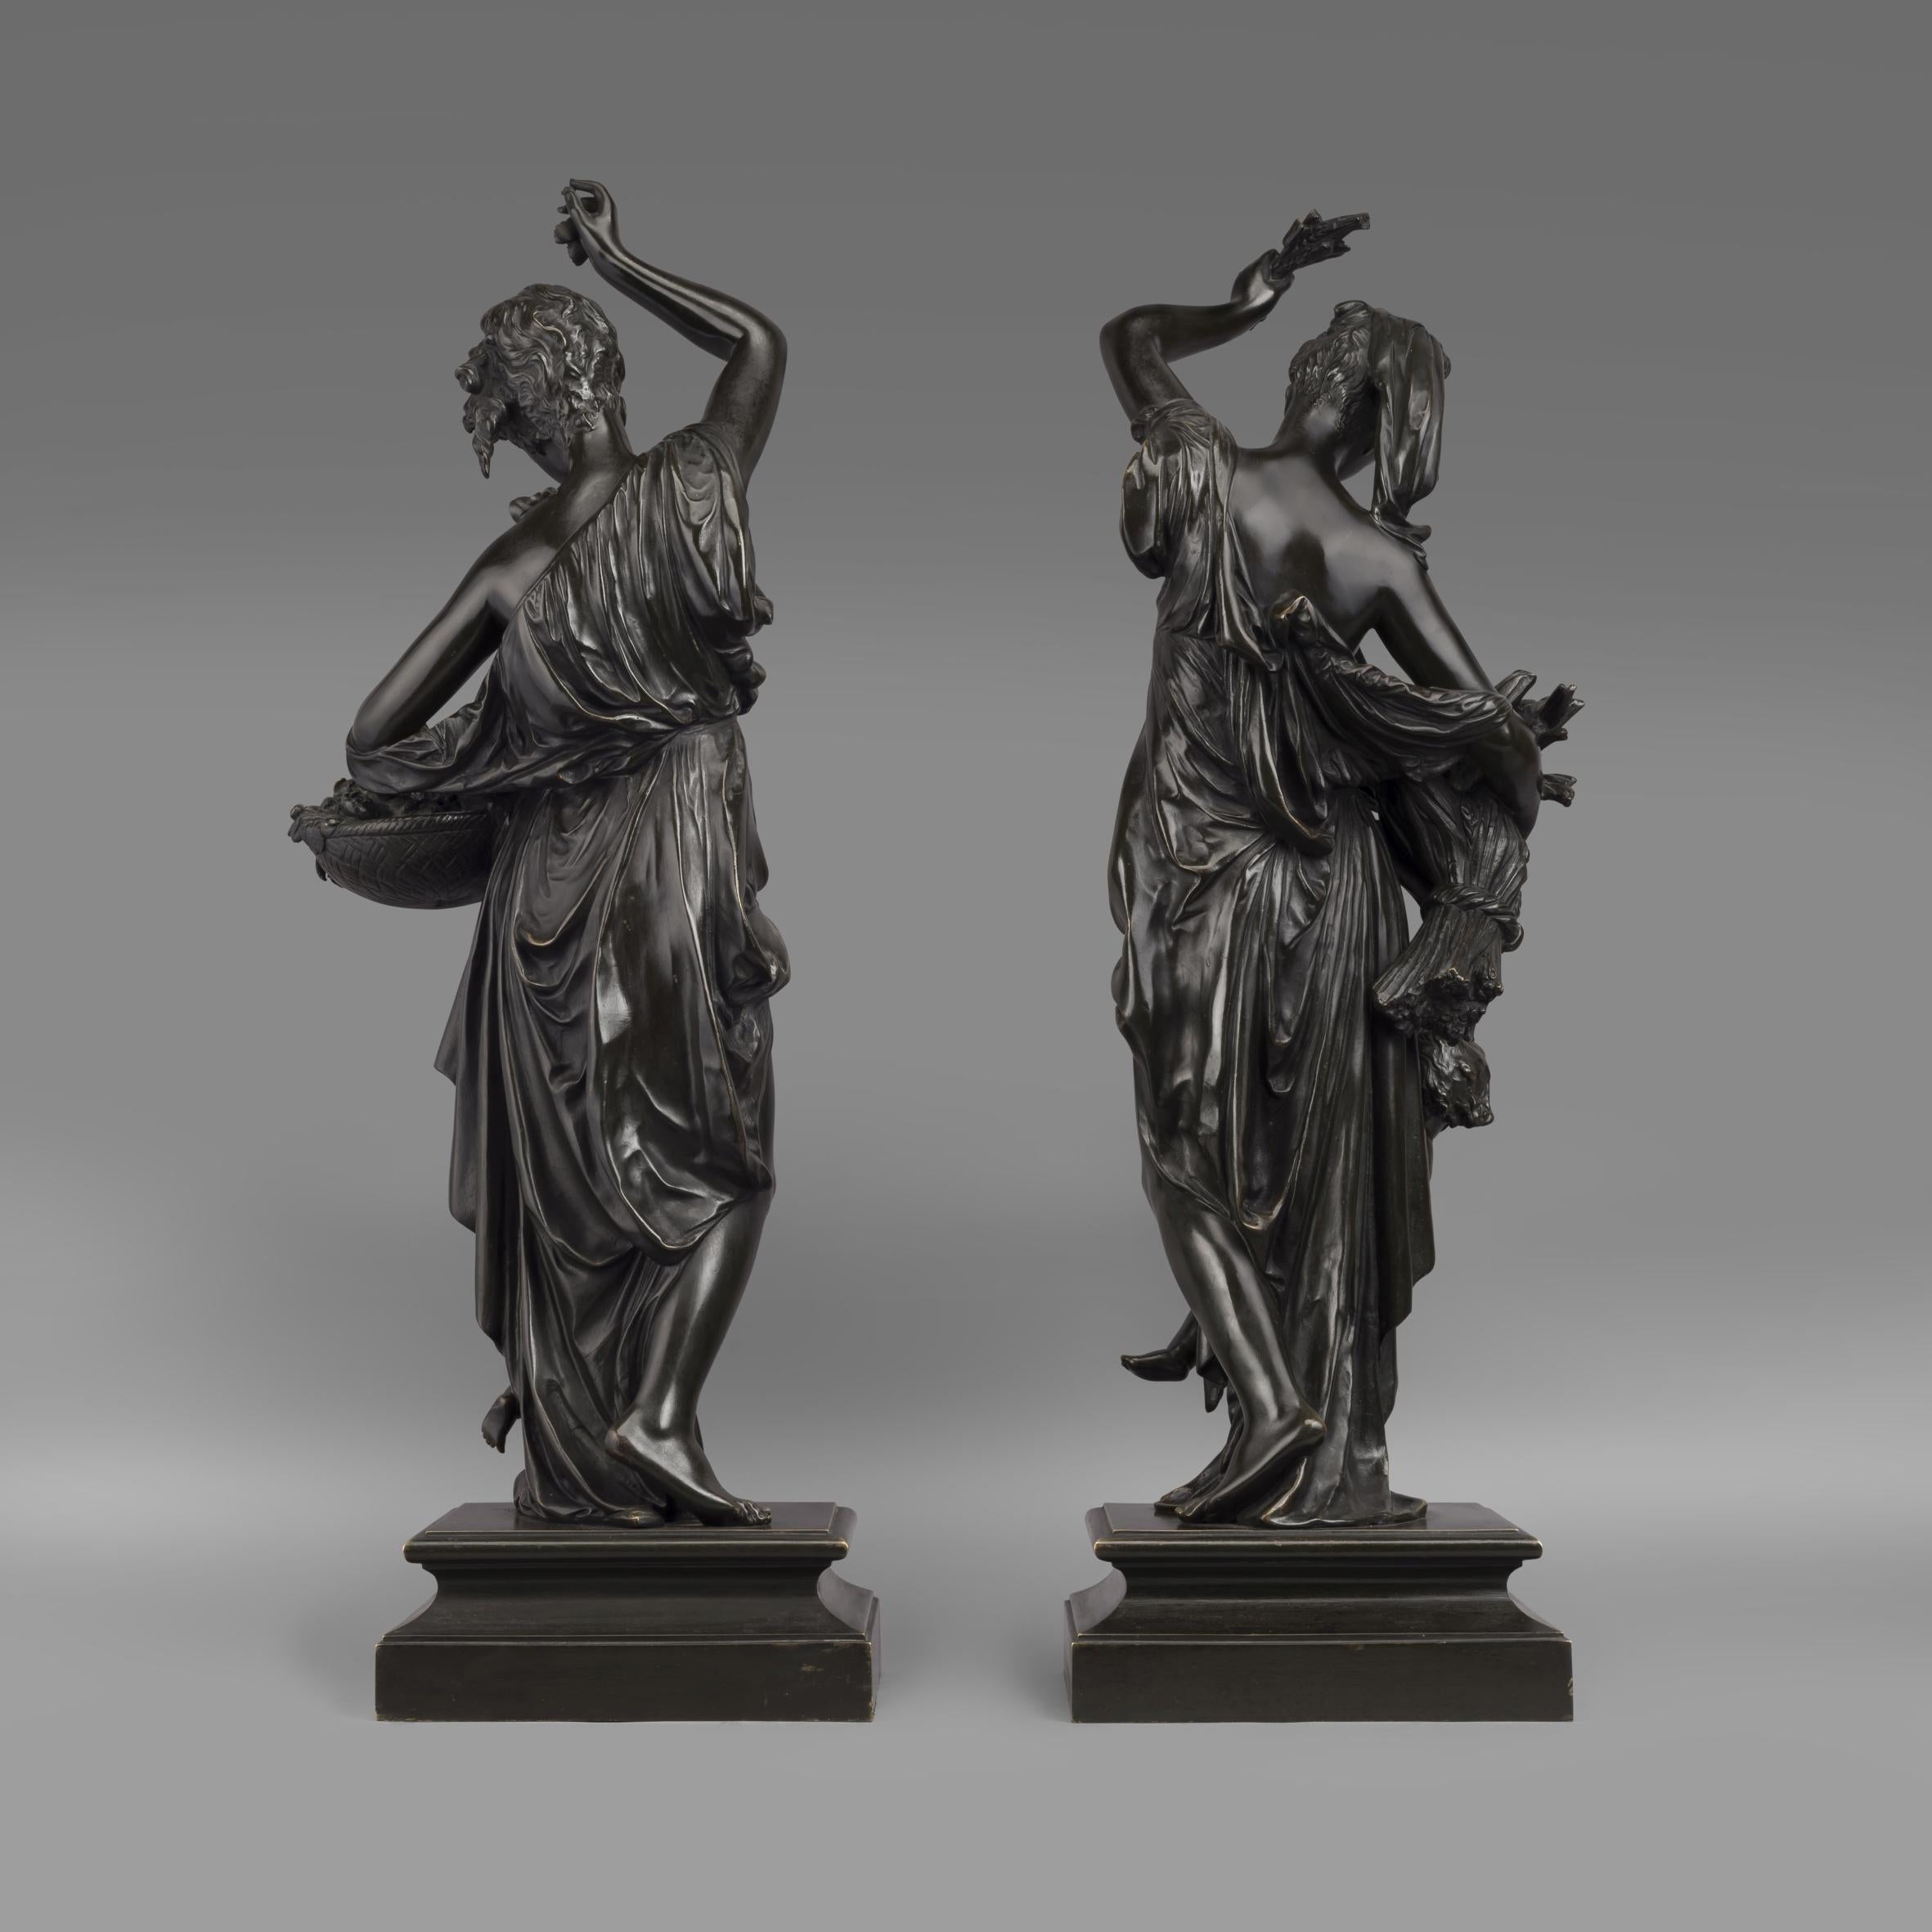 'Le Printemps et L'Eté', a pair of large patinated bronze allegorical figures depicting spring and summer after Albert Ernest Carrier-Belleuse.

Signed to the base of each figure 'A. Carrier-Belleuse'. 

Albert Ernest Carrier-Belleuse

Albert